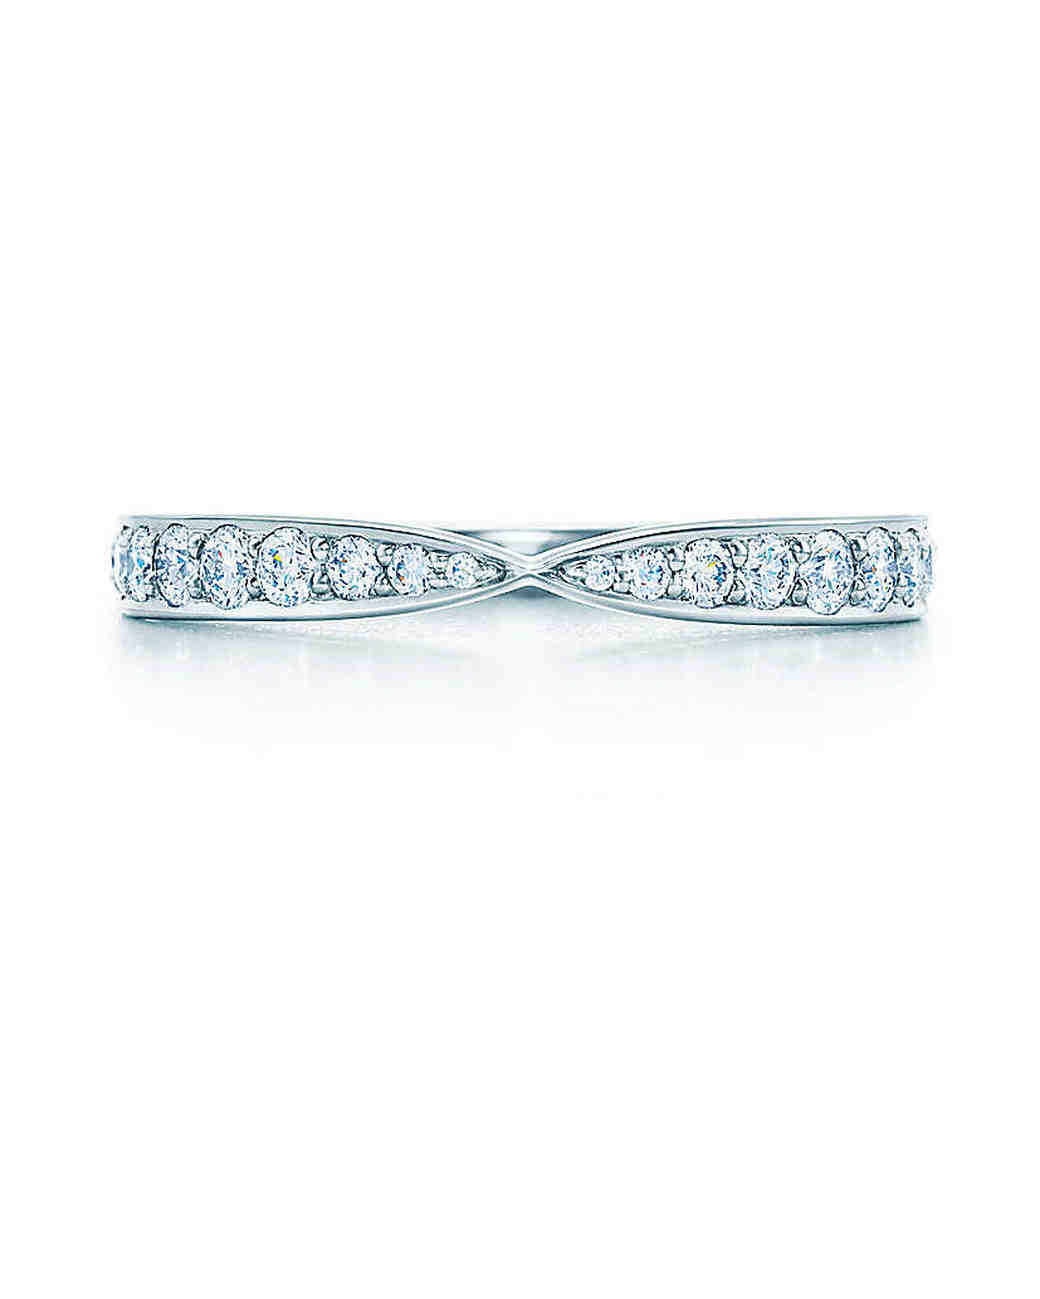 Tiffany Harmony Wedding Band
 Wedding Bands That Pair Perfectly with Unique Engagement Rings